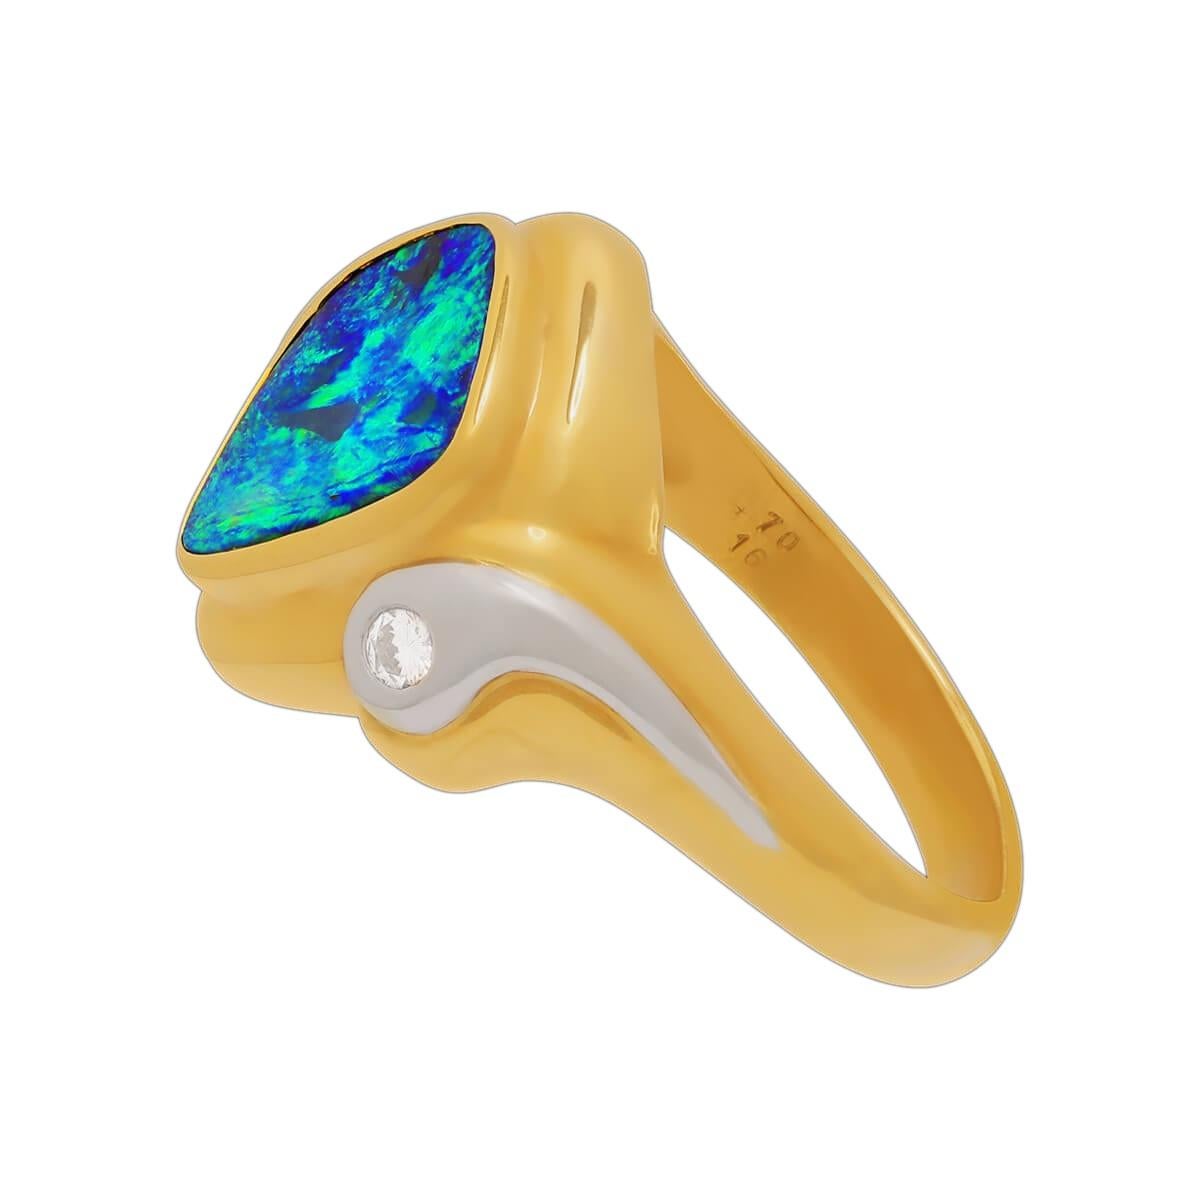 If you like your opal bright, here is one that is almost off the charts. This amazing blue-green black boulder opal is of clean, vivid colour, set in an 18K solid gold and platinum ring with high jewellery grade diamonds. The bright green flash will